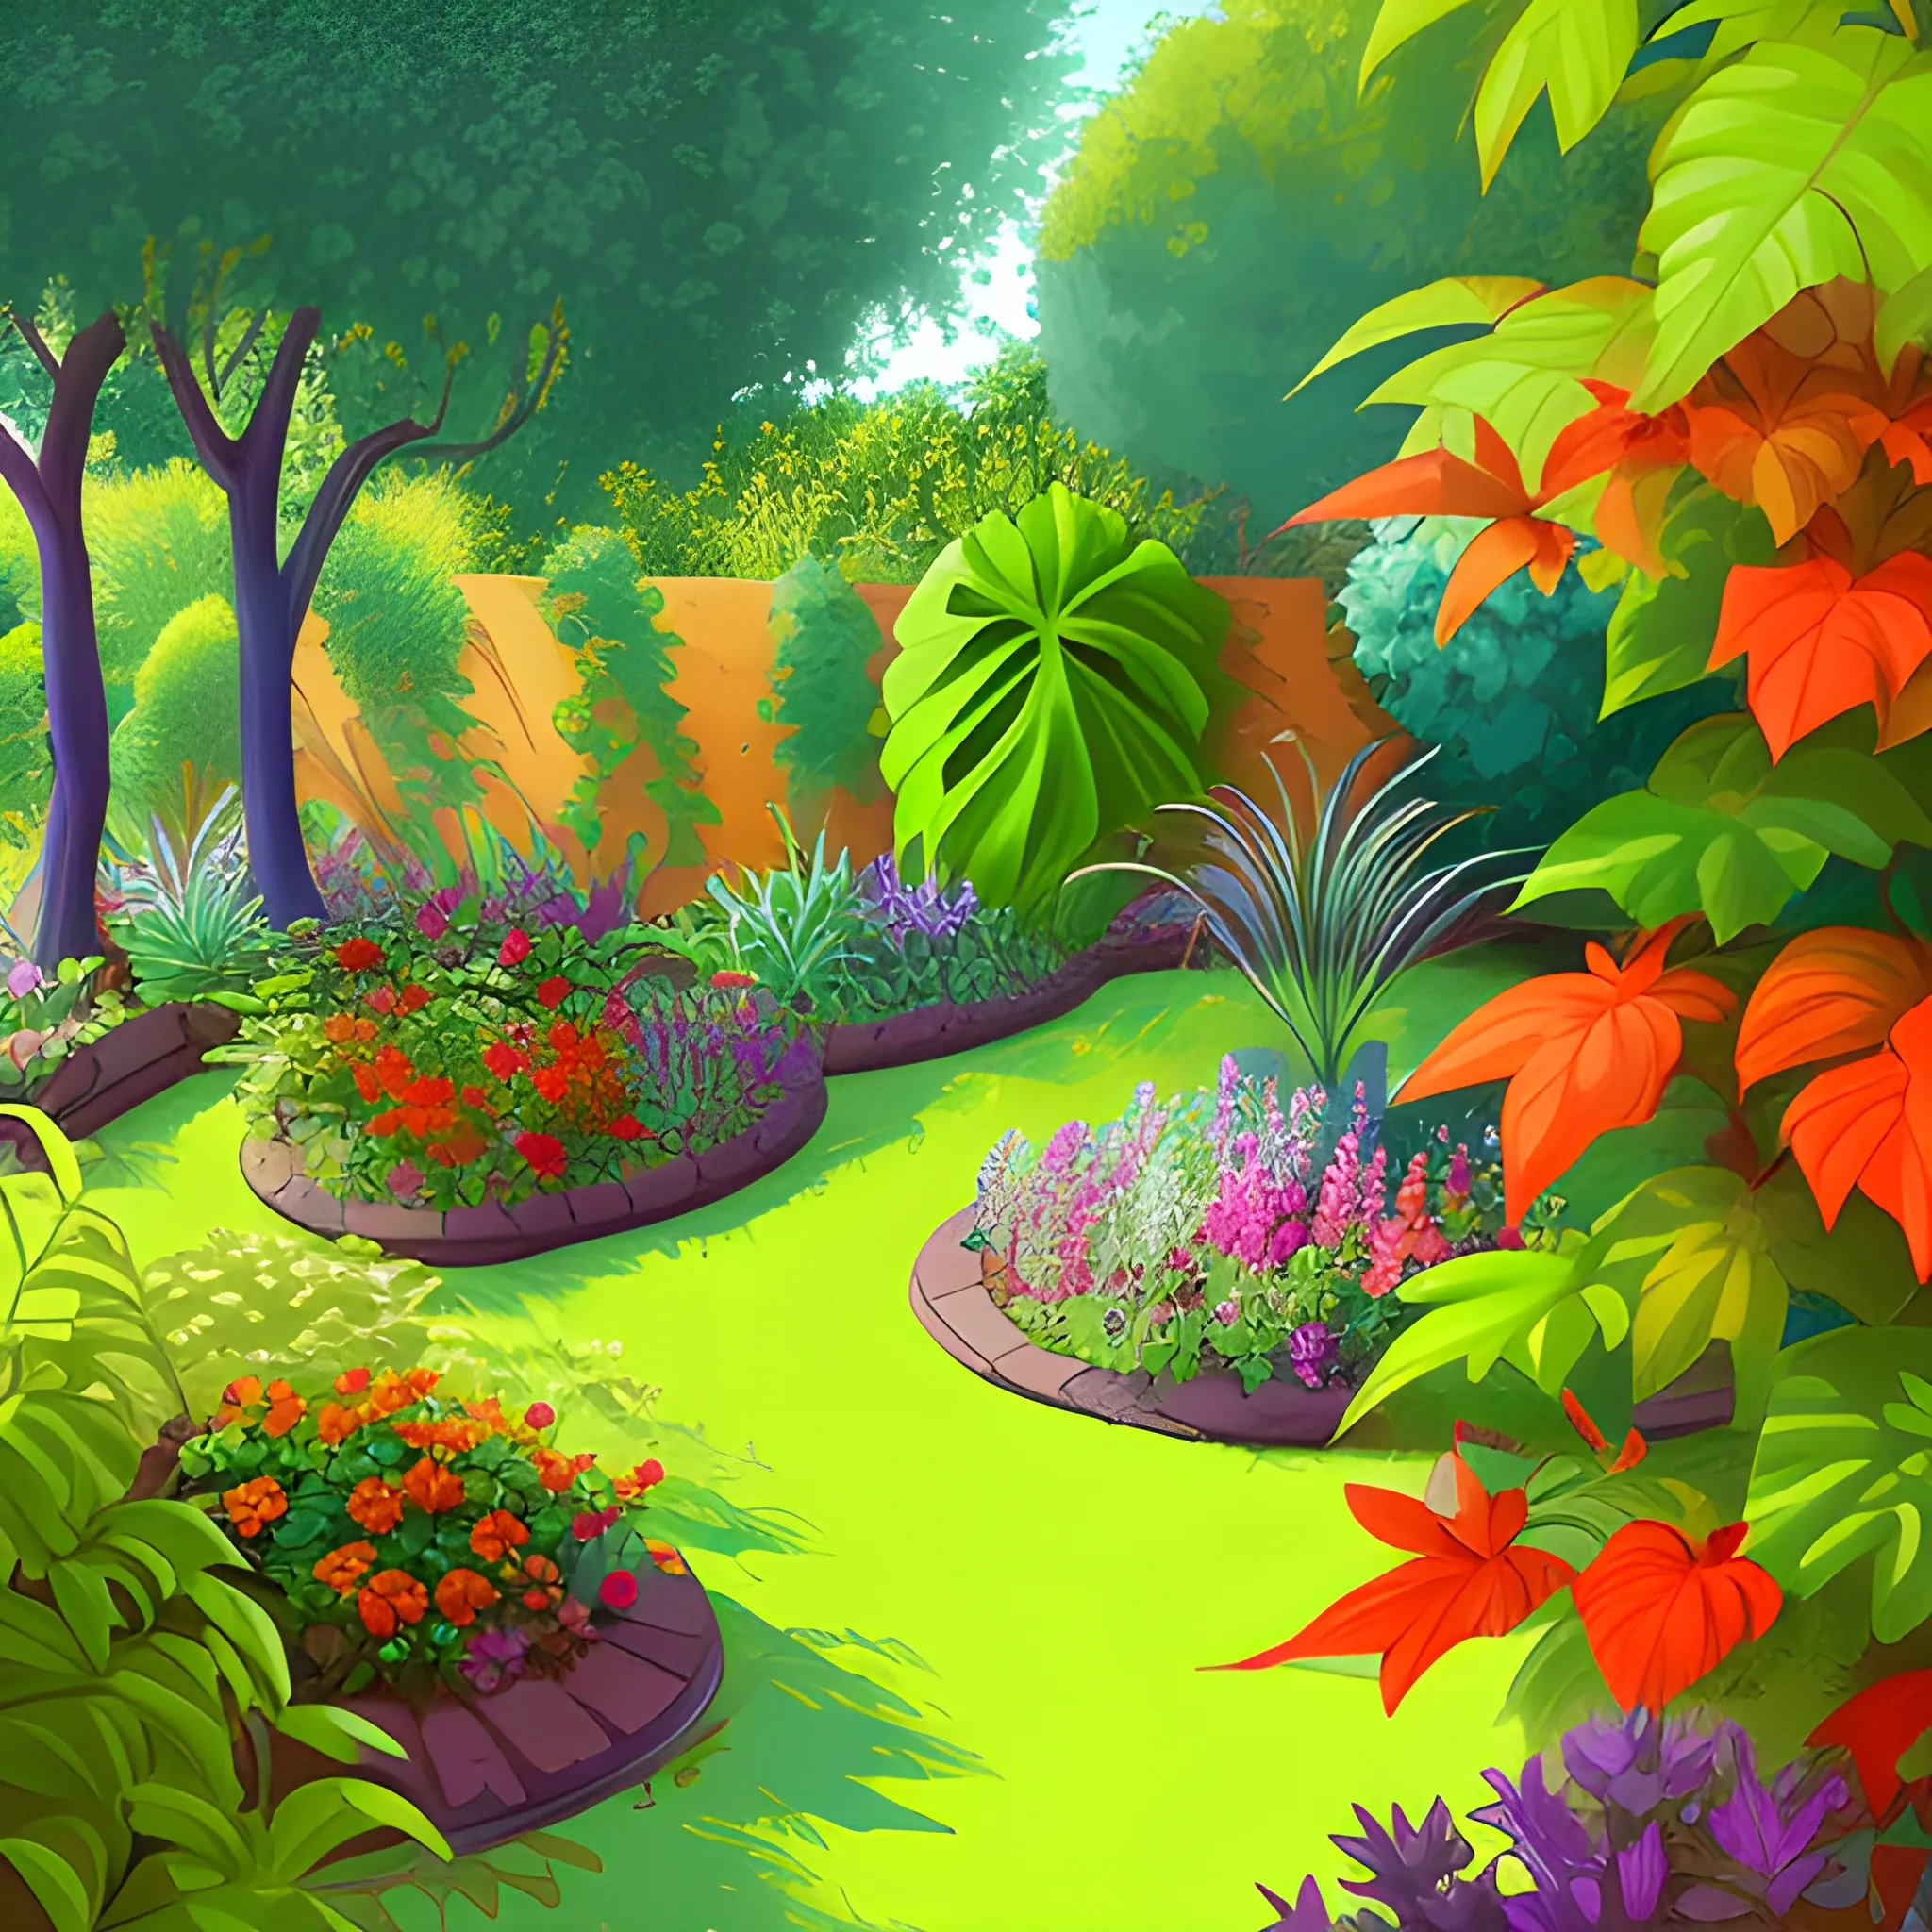 garden with very large leafy plants in digital painting style with warm colors